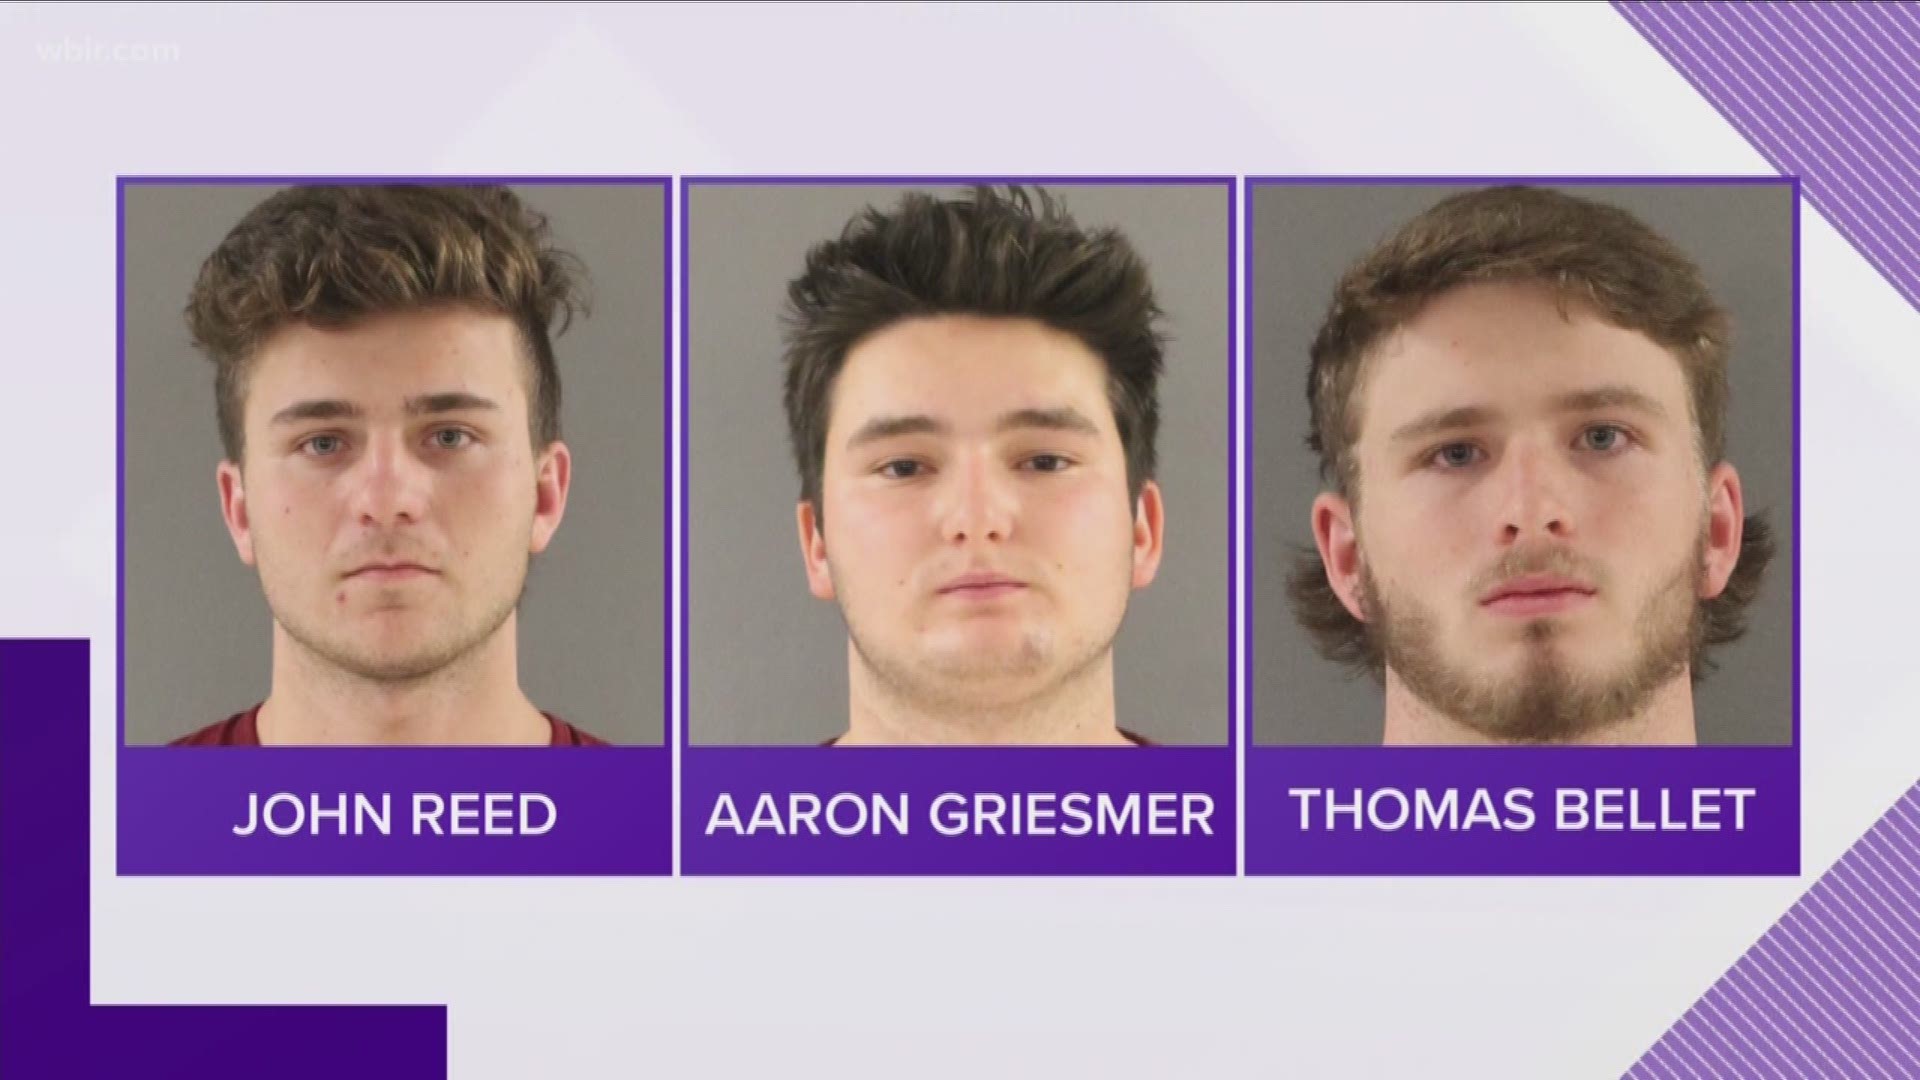 UT Police investigators have arrested three UT students on felony vandalism charges in connection to the Clement Hall pipe burst that caused the evacuation of the building and damages over the weekend.